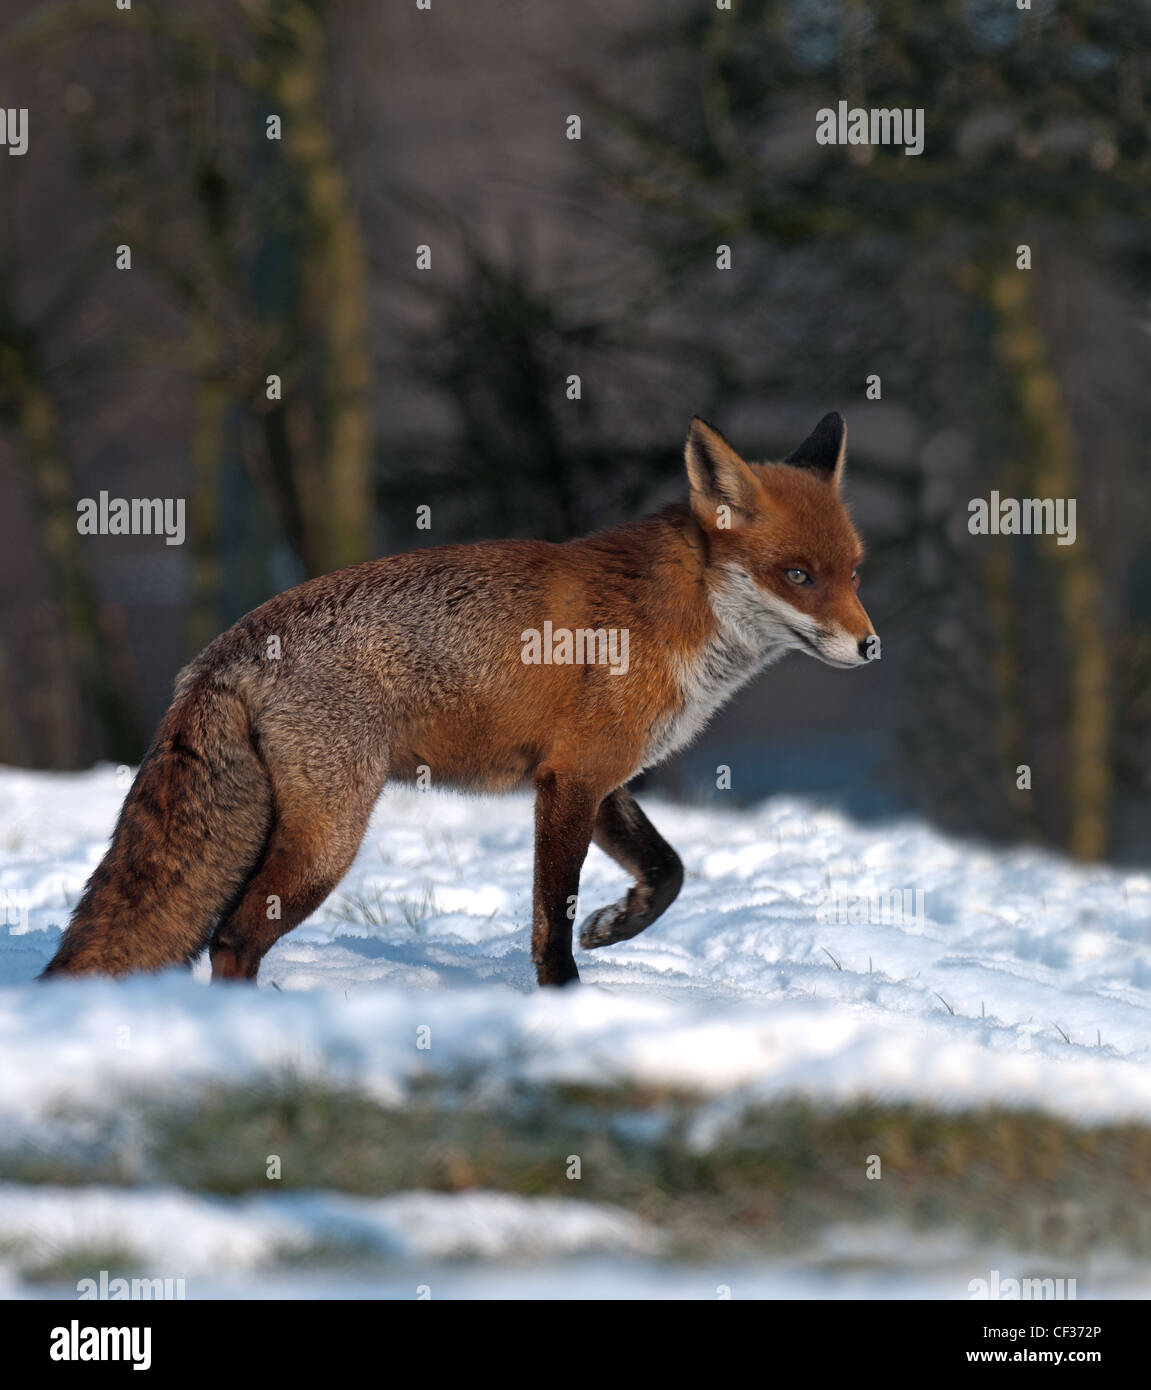 RED FOX Vulpes vulpes IN NEVE. Foto Stock